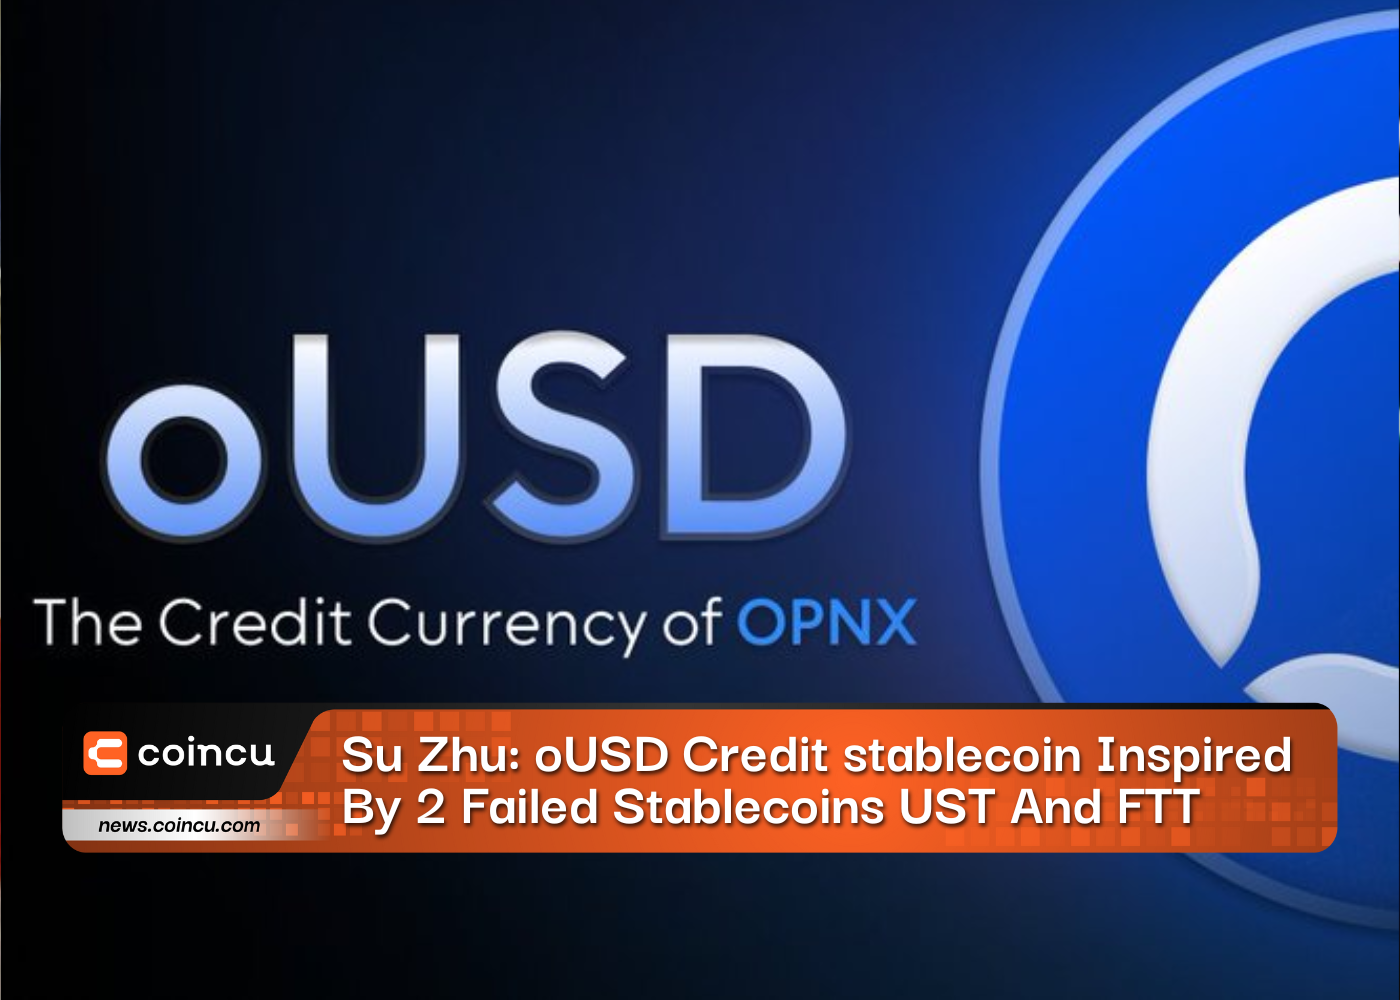 Su Zhu: oUSD Credit stablecoin Inspired By 2 Failed Stablecoins UST And FTT